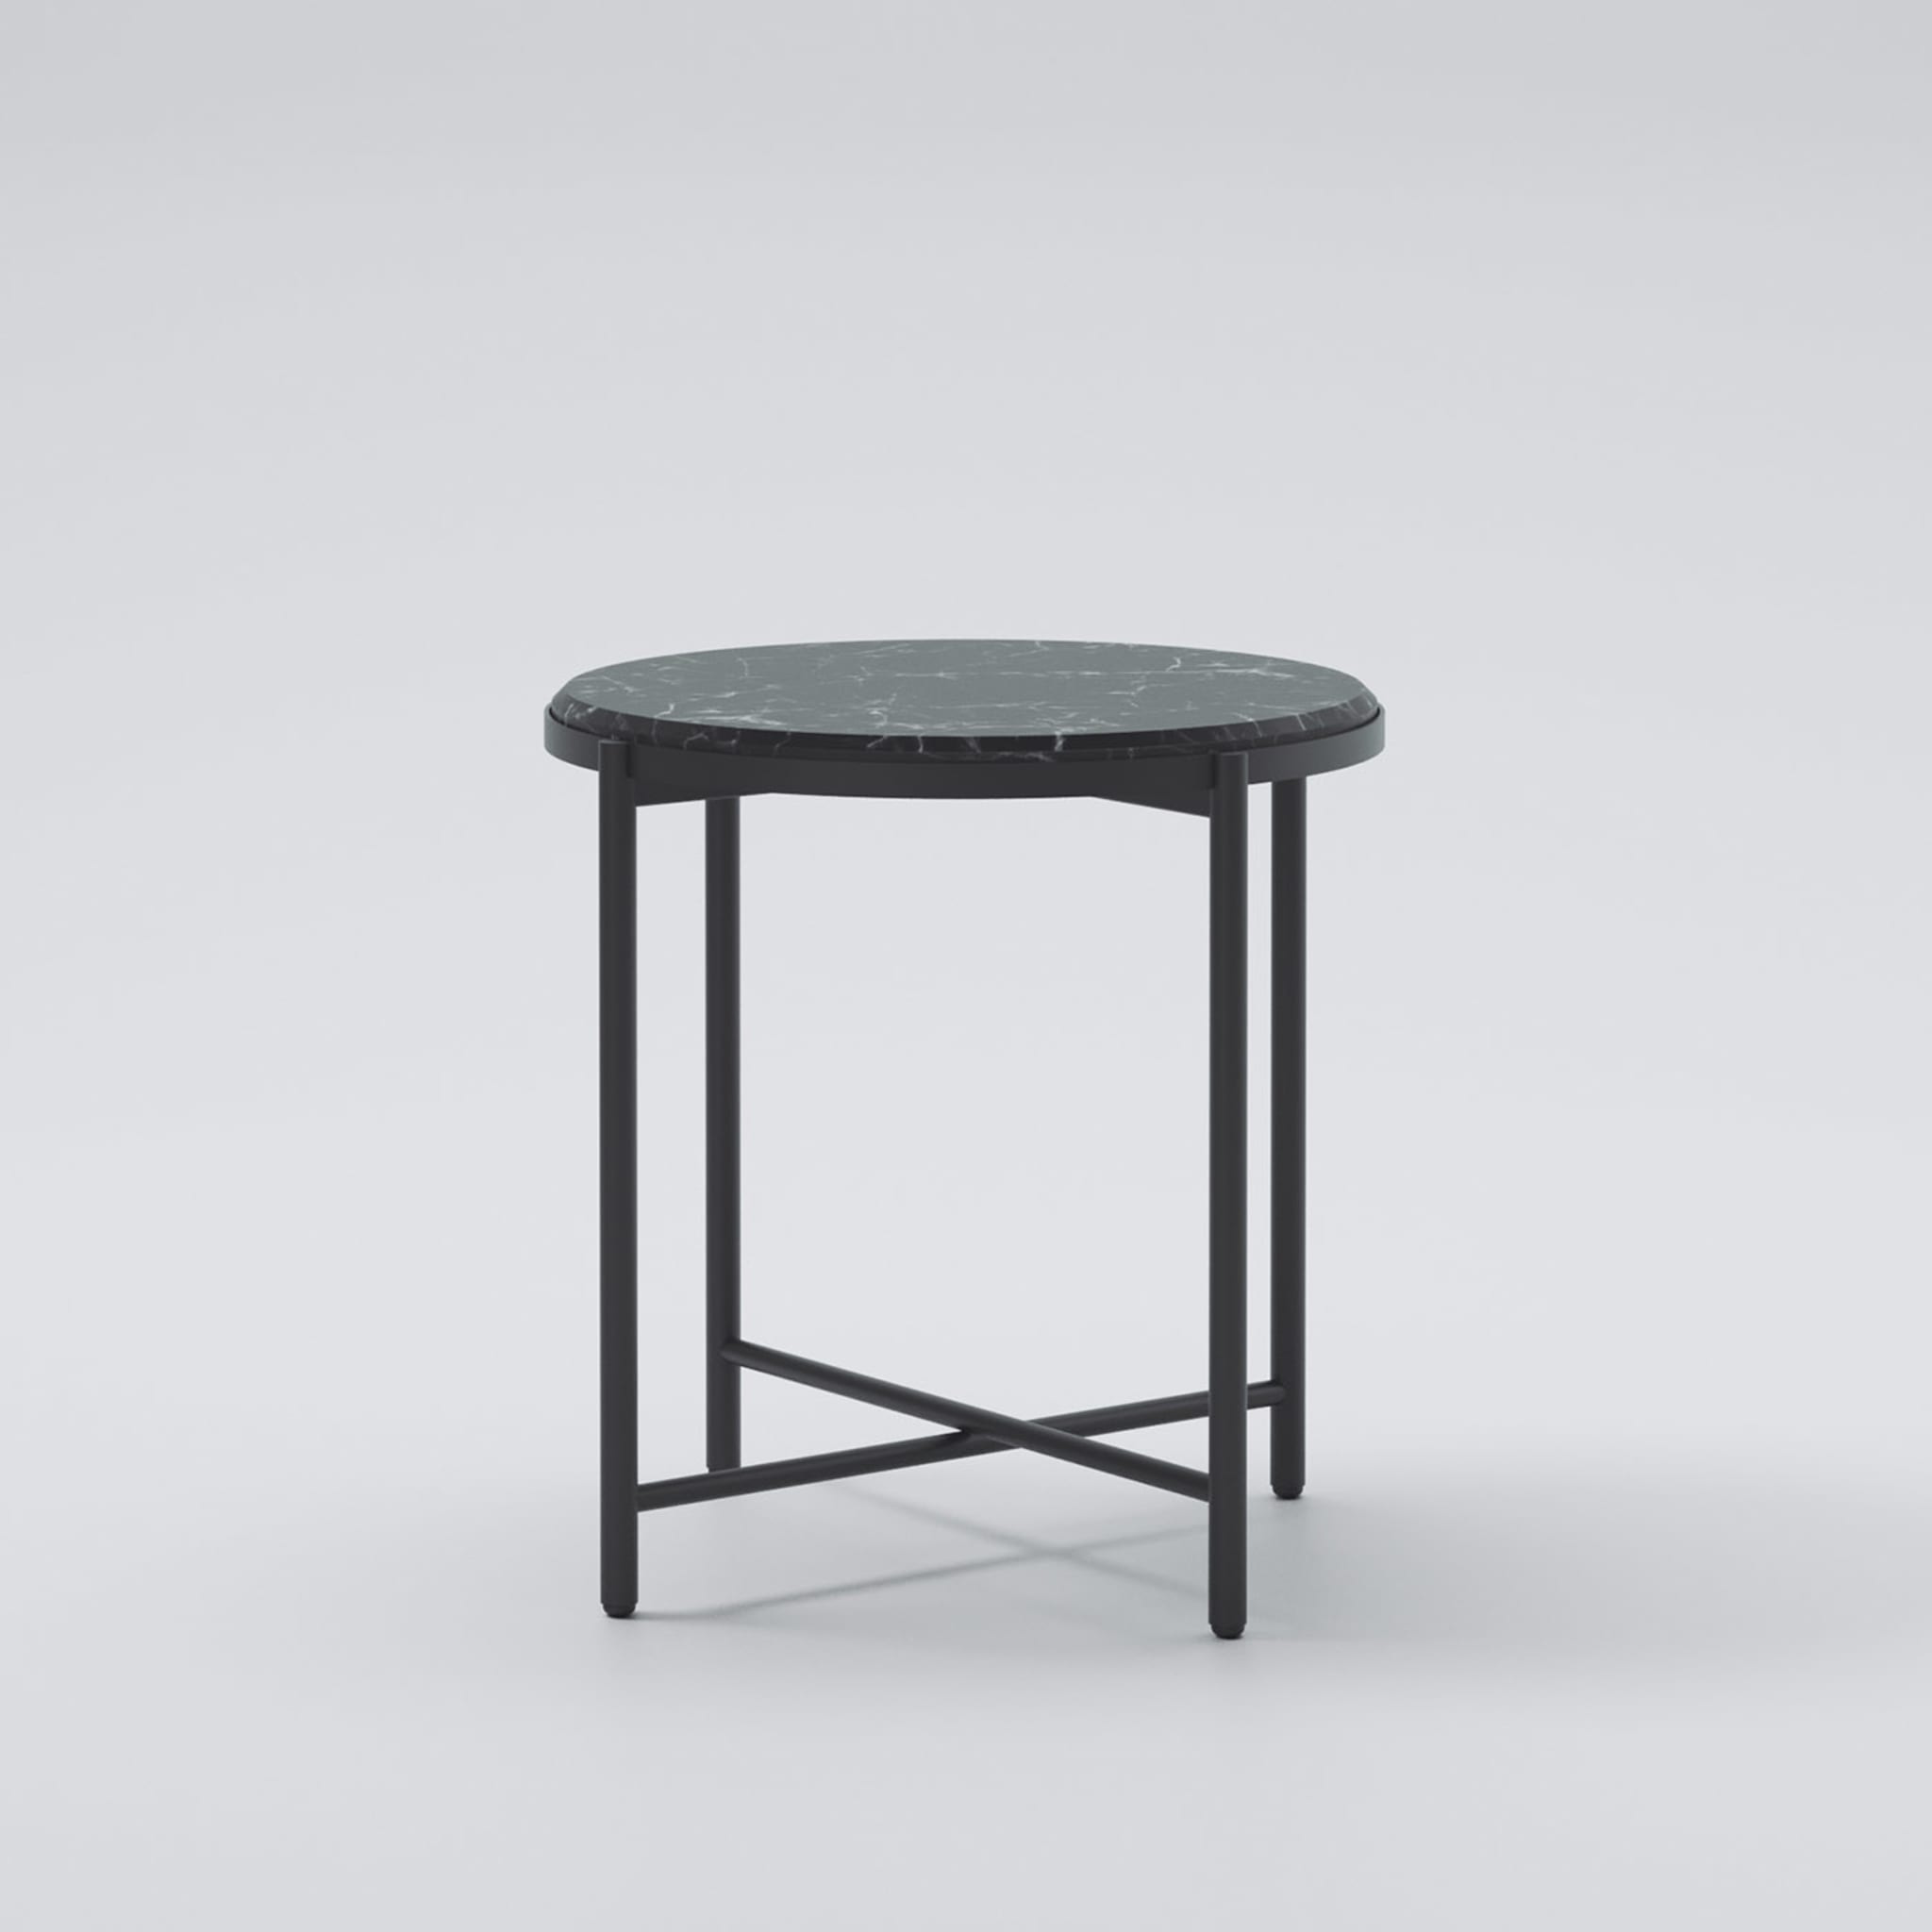 Magenta Black Marquina Marble Side Table - Alternative view 1